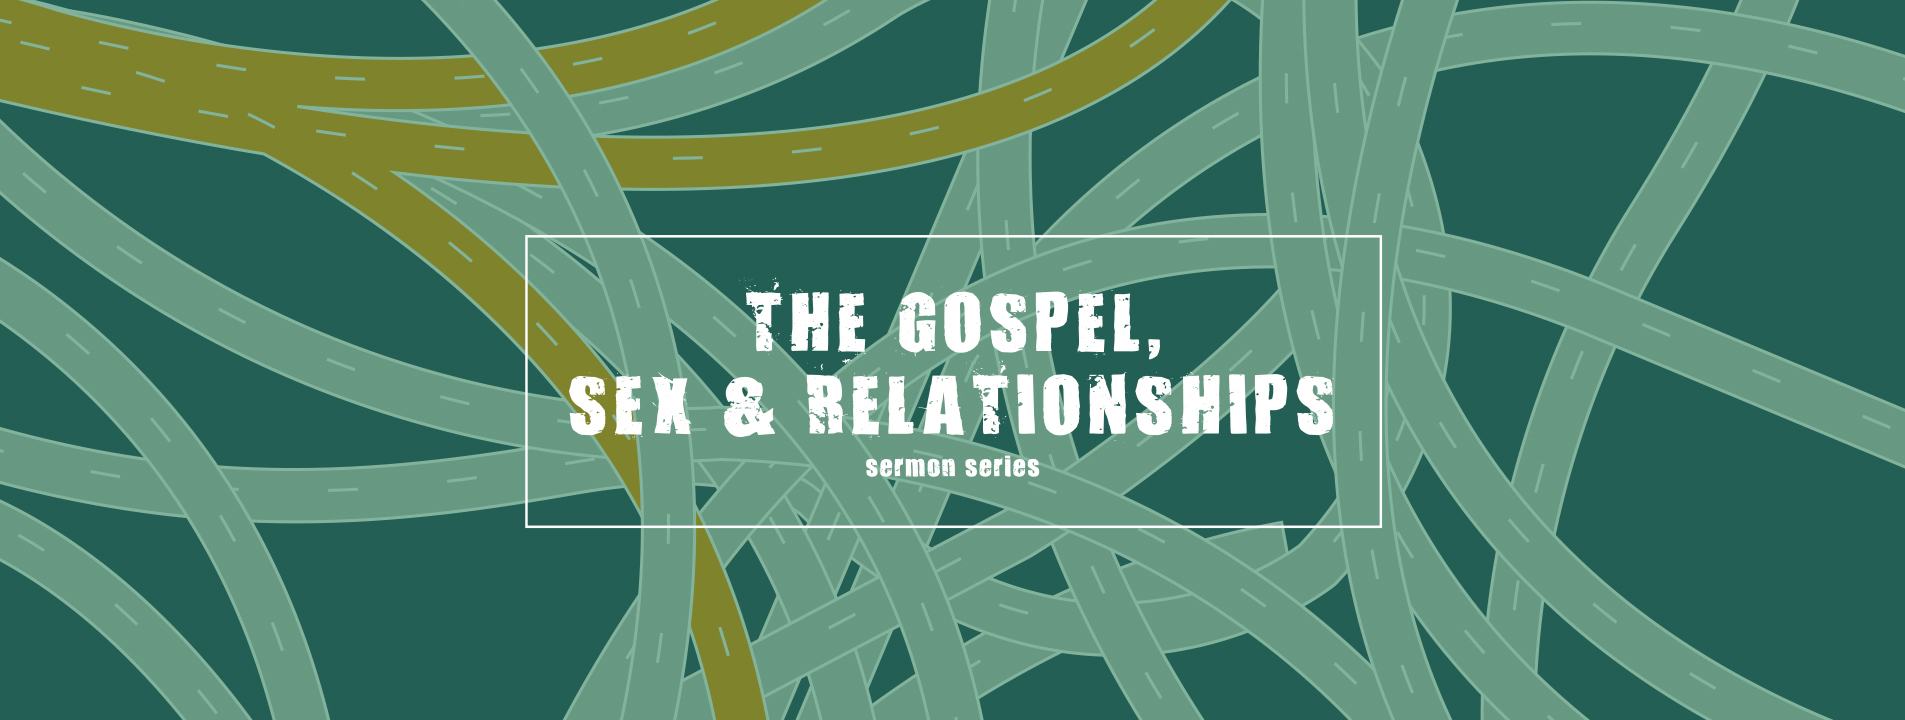 The Gospel and Marriage